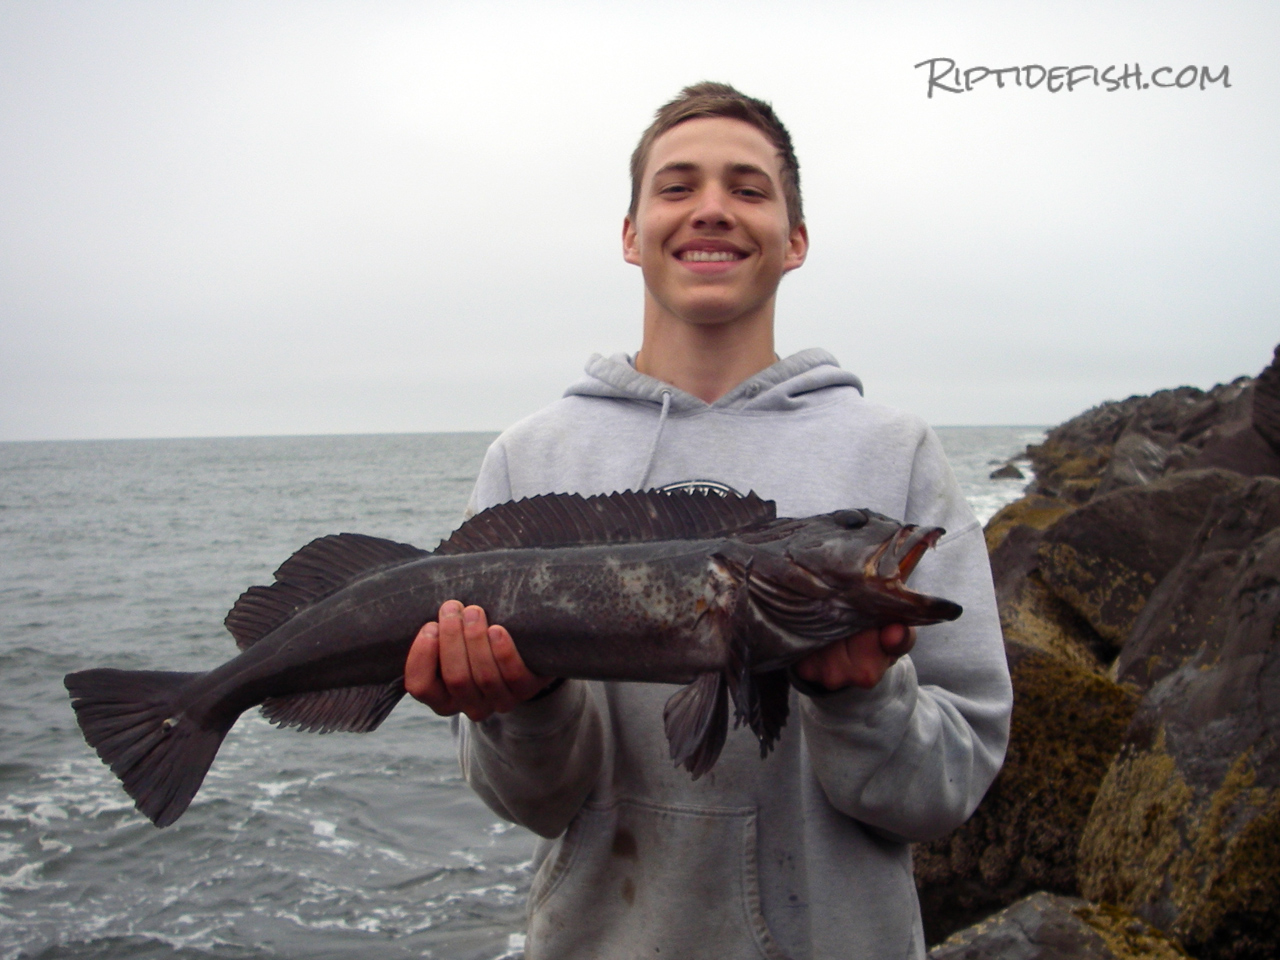 Jetties can be a great place to fish for Lingcod if you don't have a boat. 